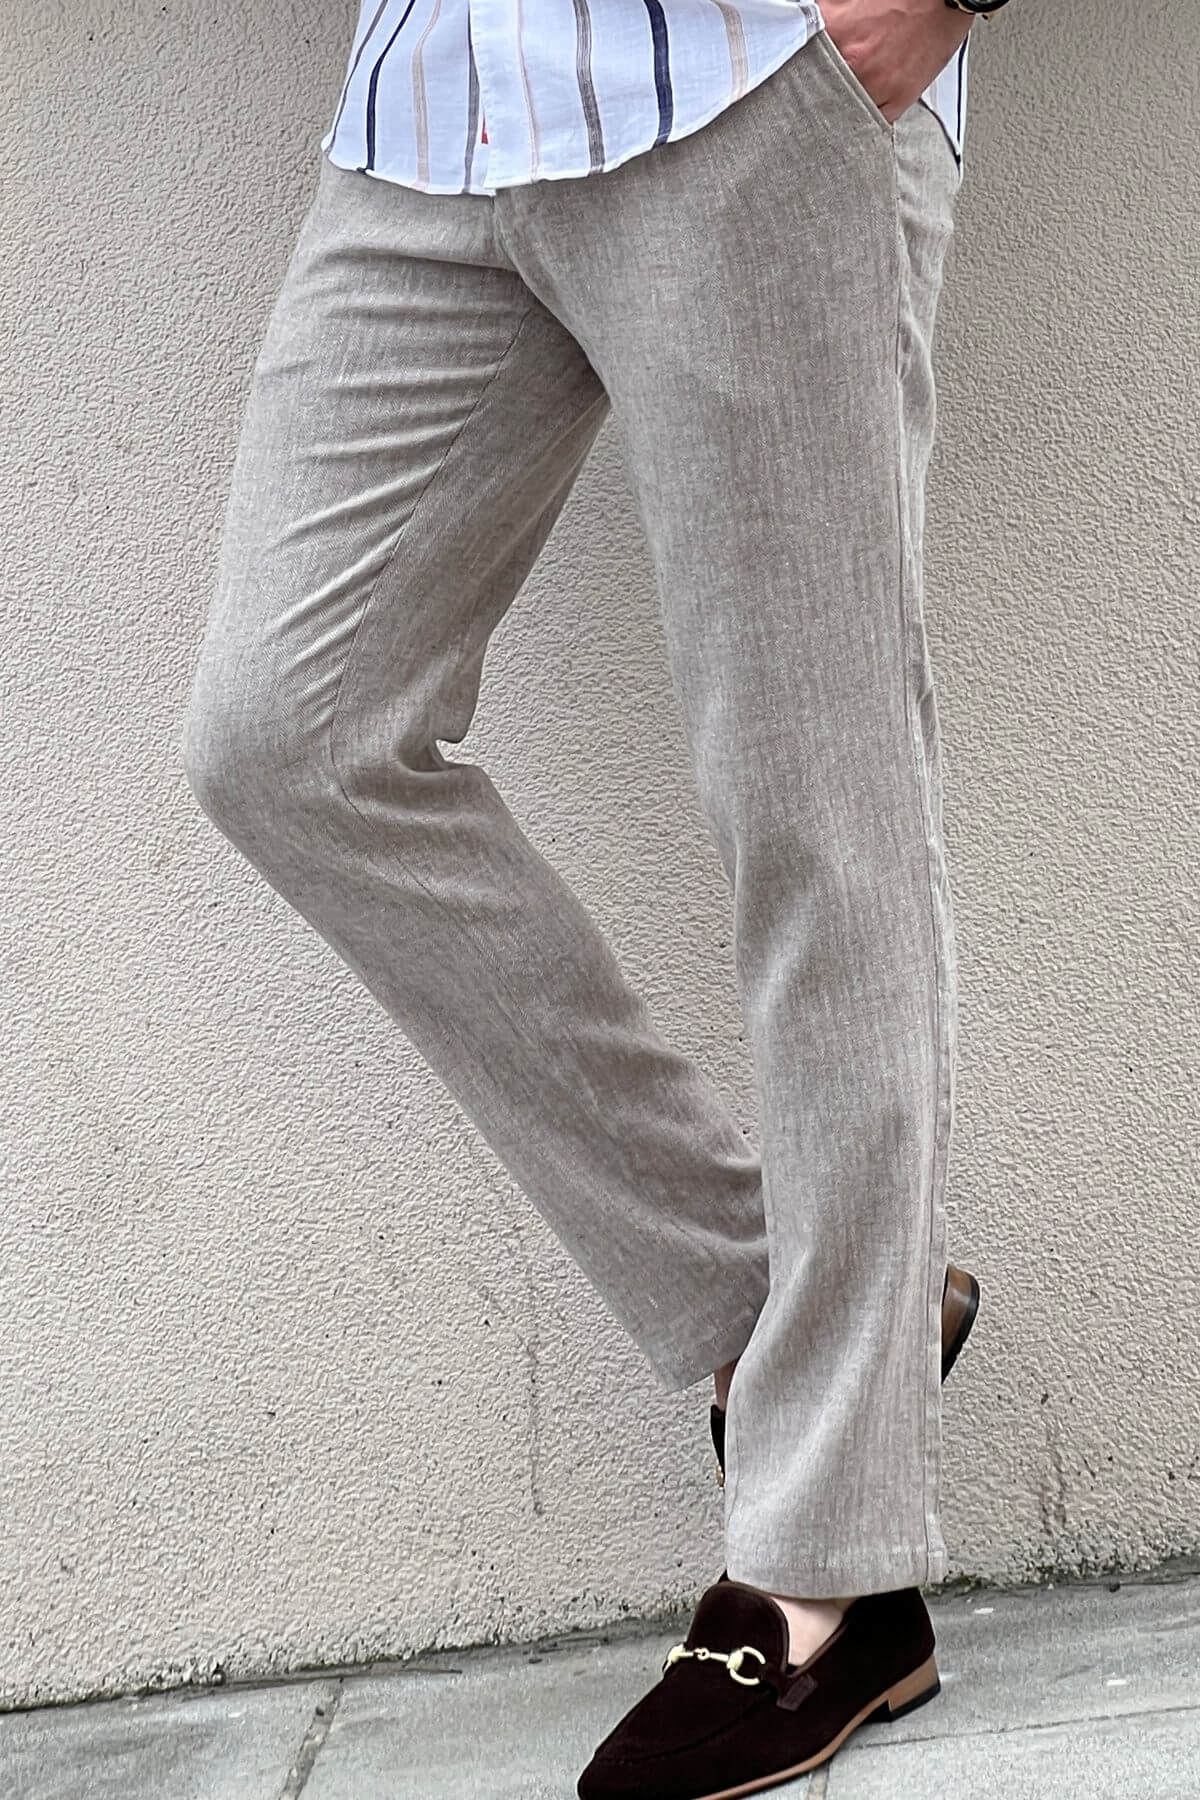 A Beige Linen Trousers on display